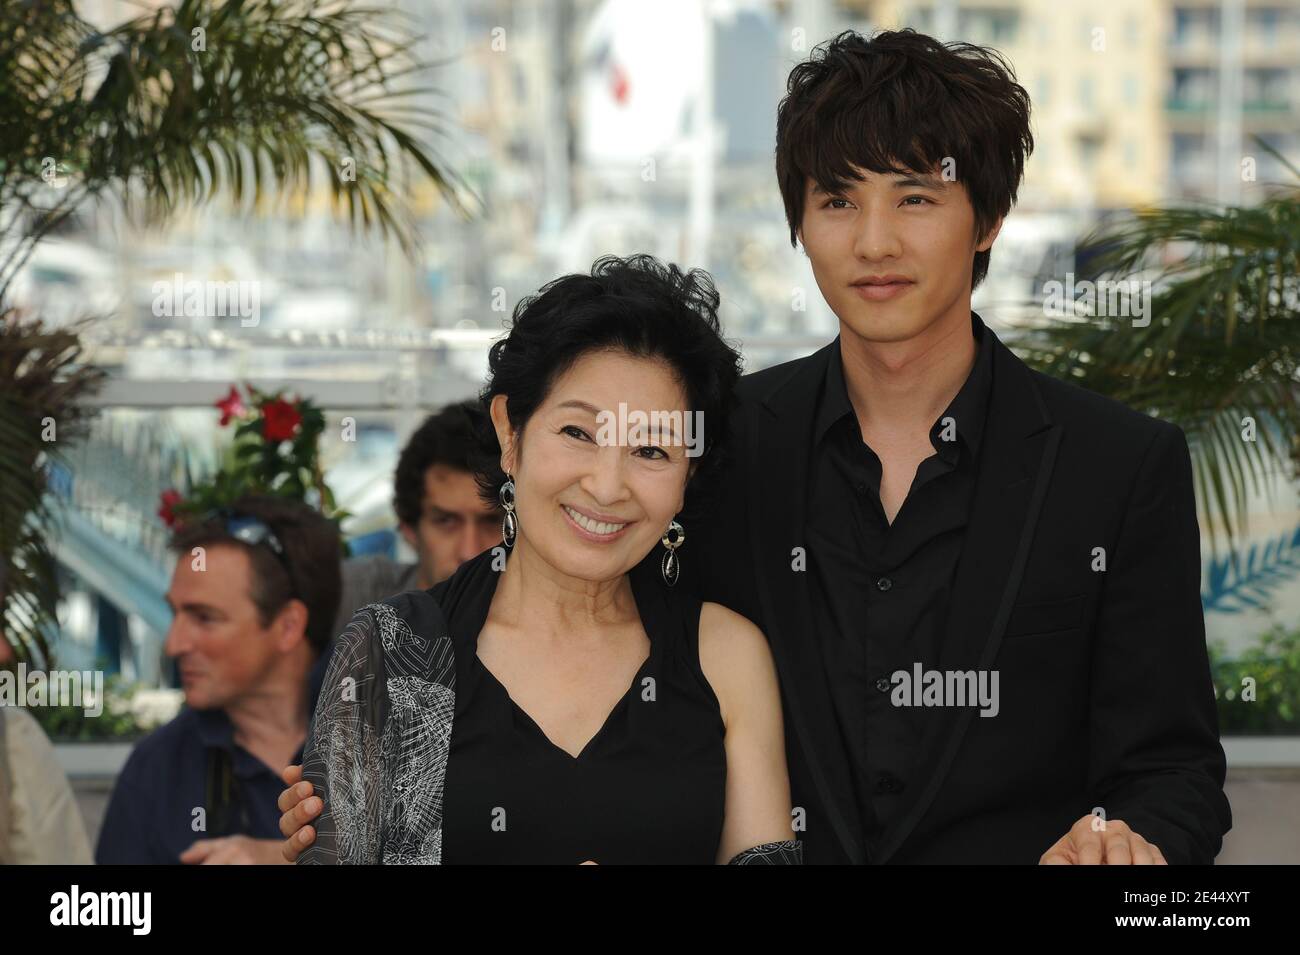 Actress Kim Hye-Ja and Actor Won Bin attend the 'Mother' Photocall held at the Palais Des Festival during the 62nd International Cannes Film Festival in Cannes, France on May 16, 2009. Photo by Nebinger-Orban/ABACAPRESS.COM Stock Photo